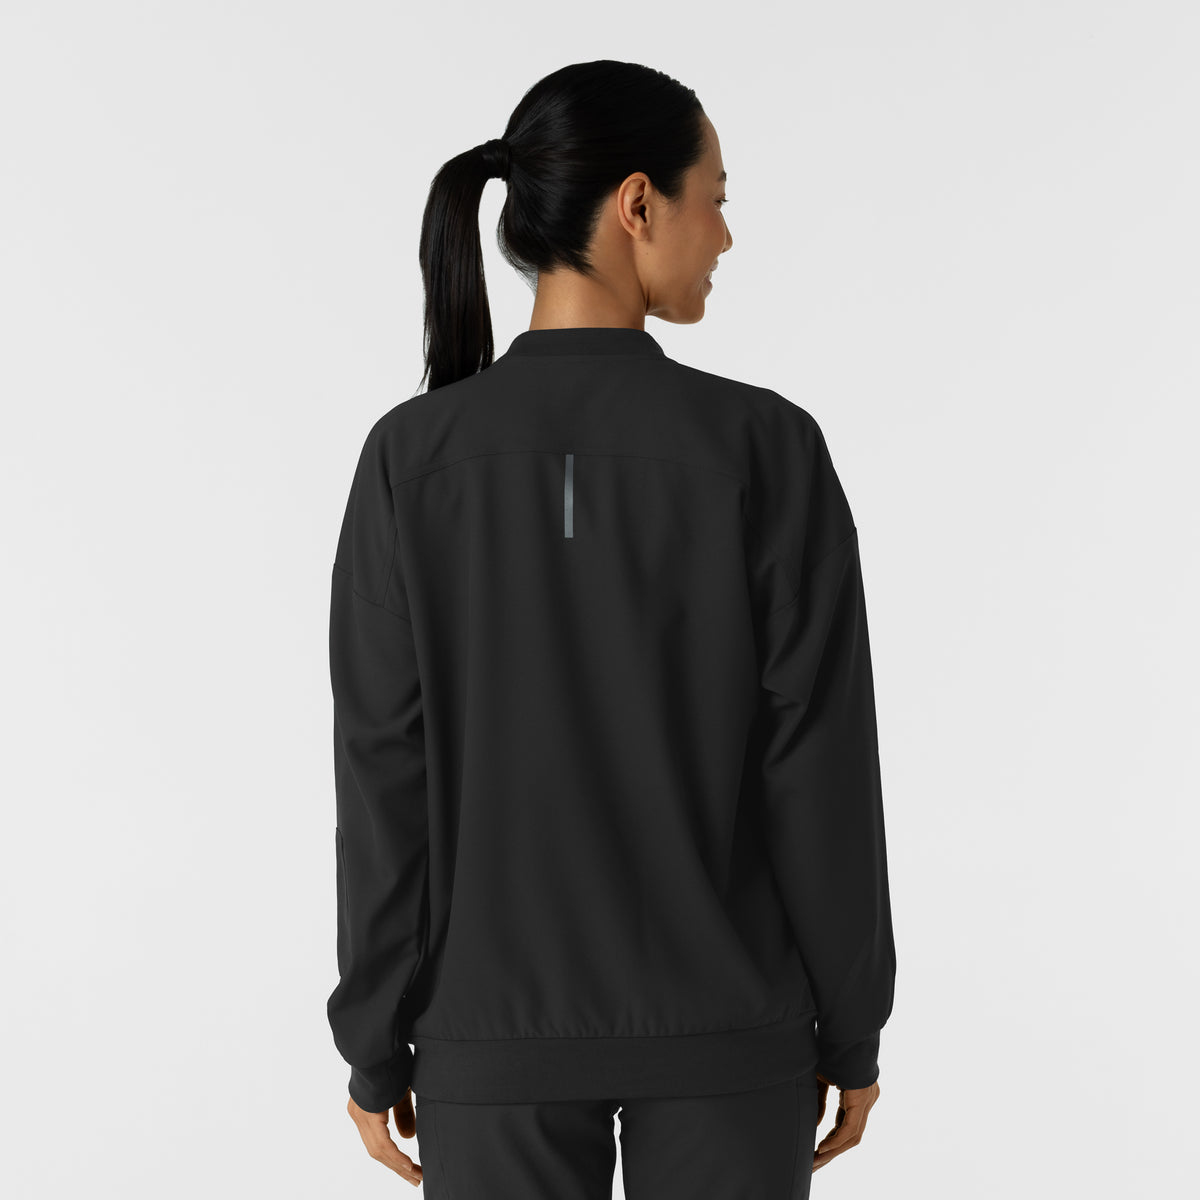 Knits and Layers Women's Bomber Scrub Jacket Black back view